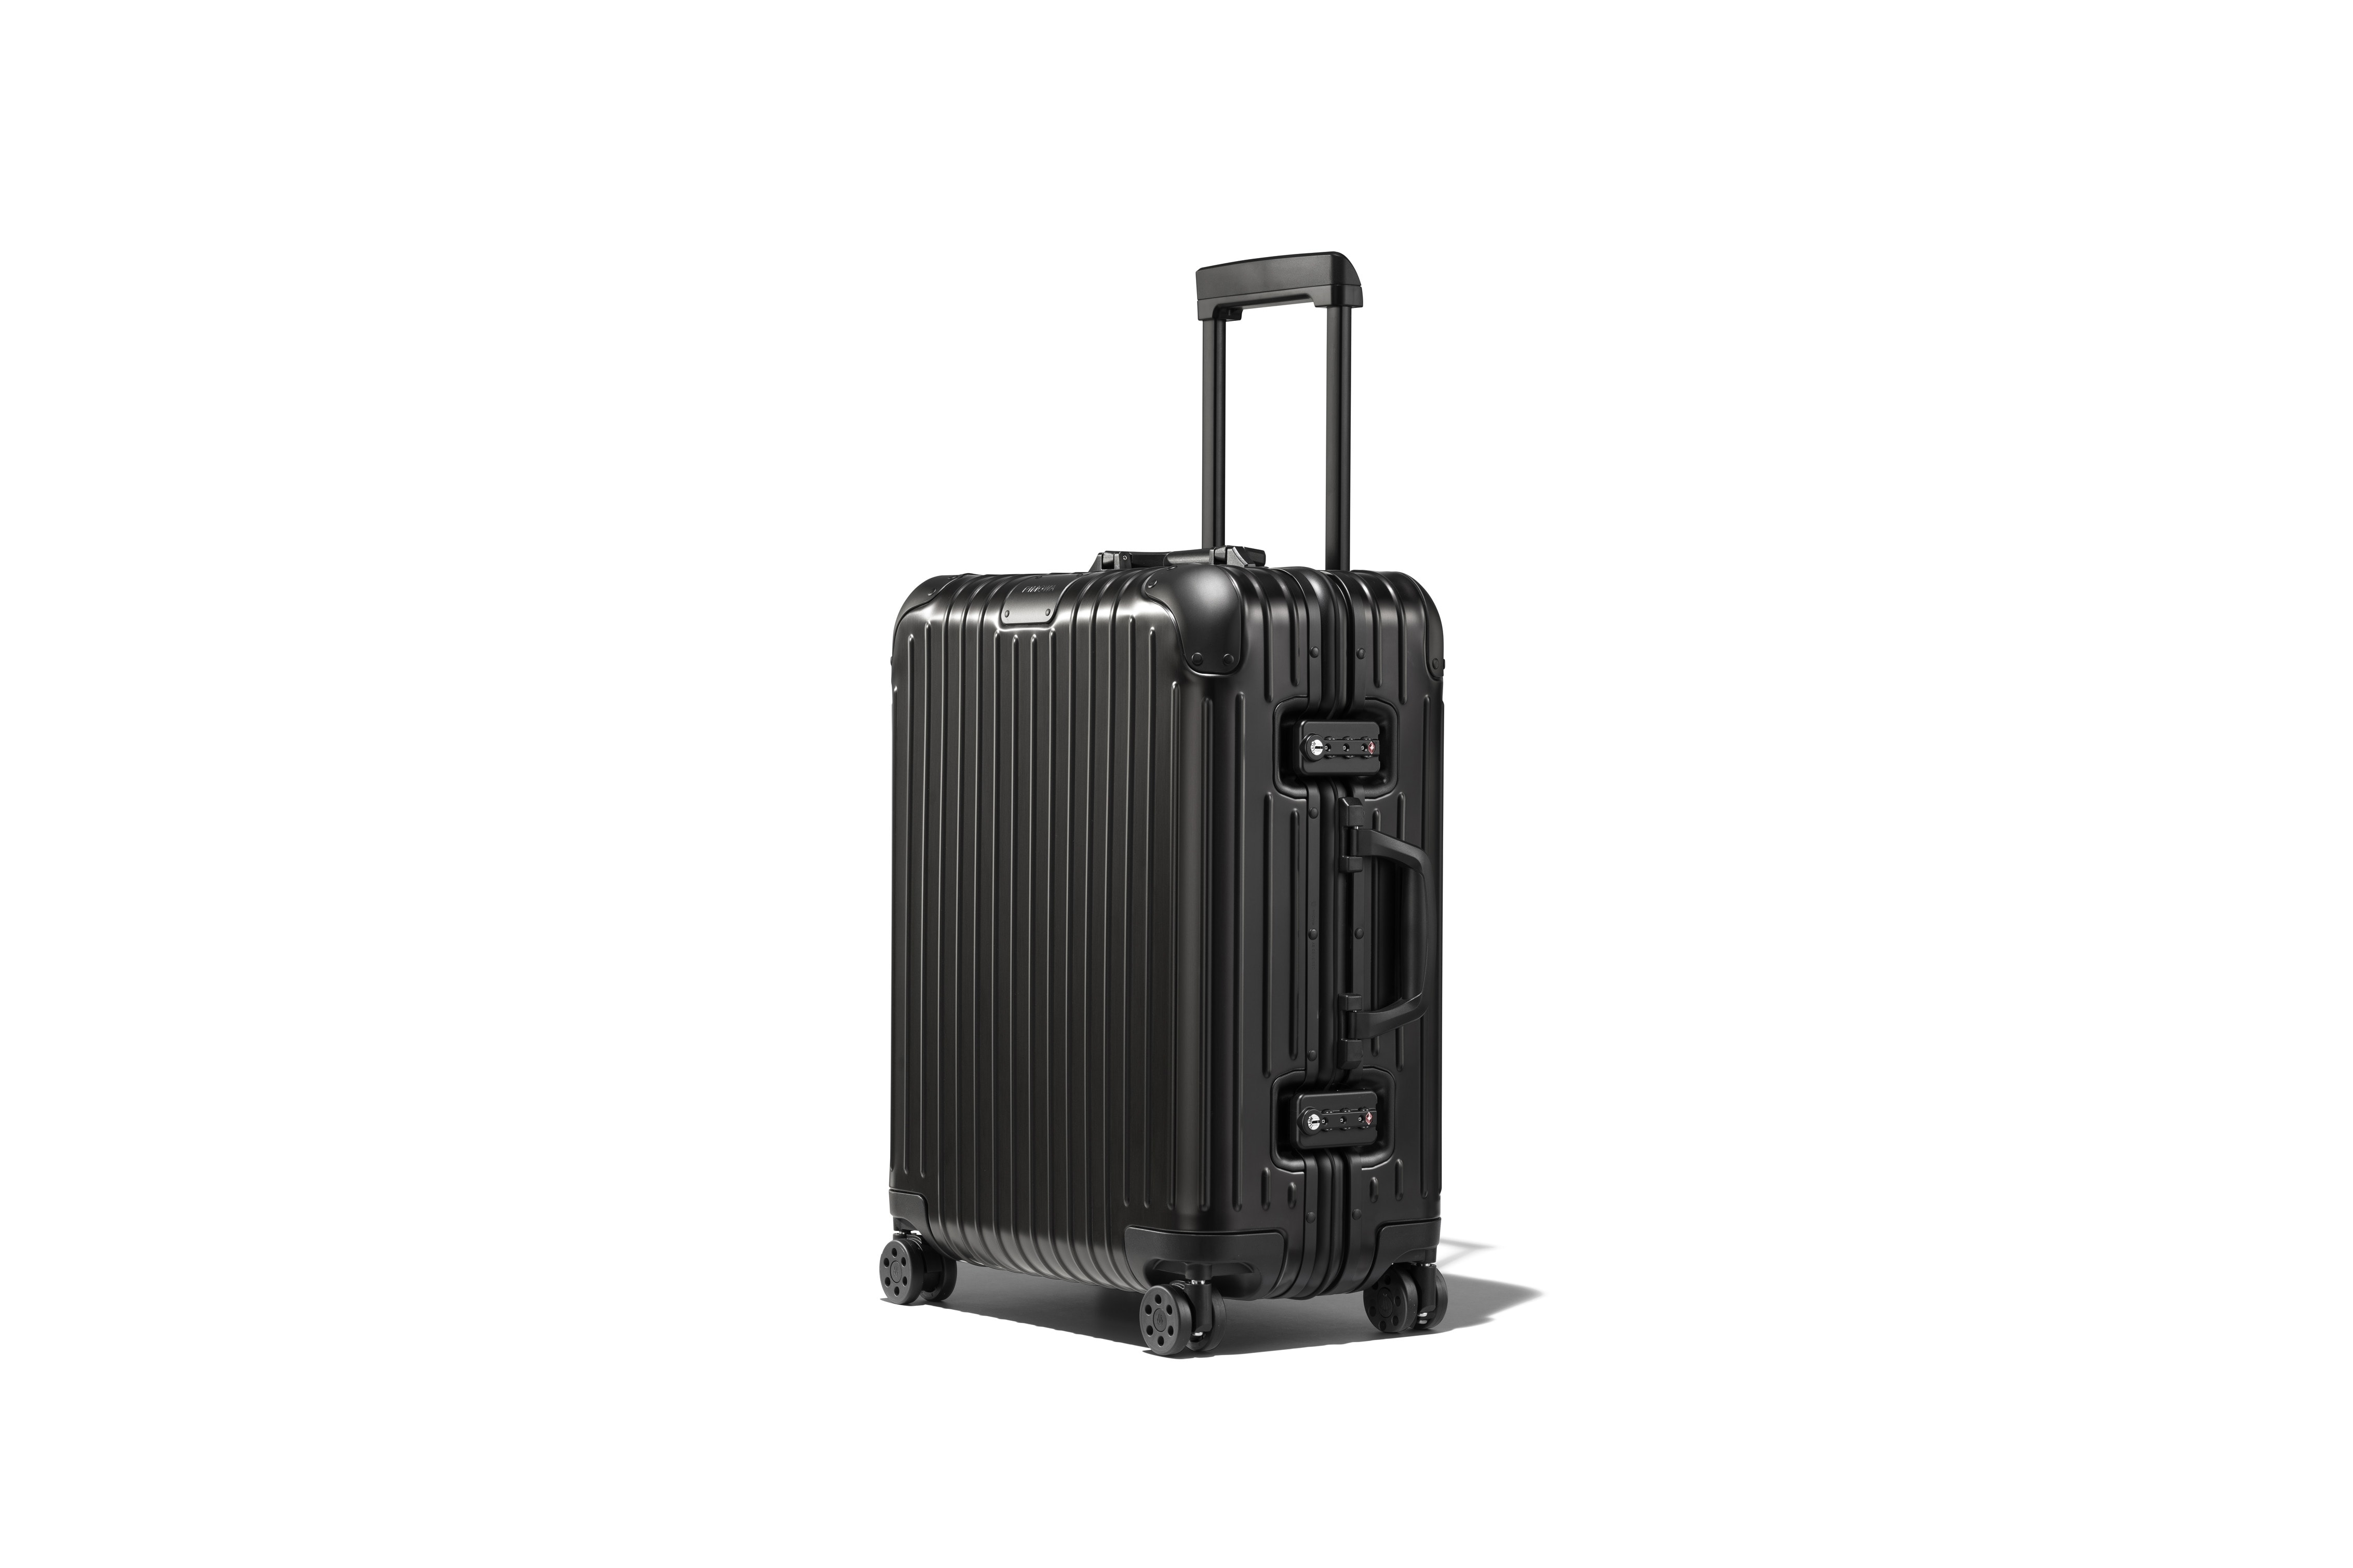 RIMOWA's New Travel Suitcase Collection Luggage Bag Vacation Summer Red Black White Silver Aluminium Design